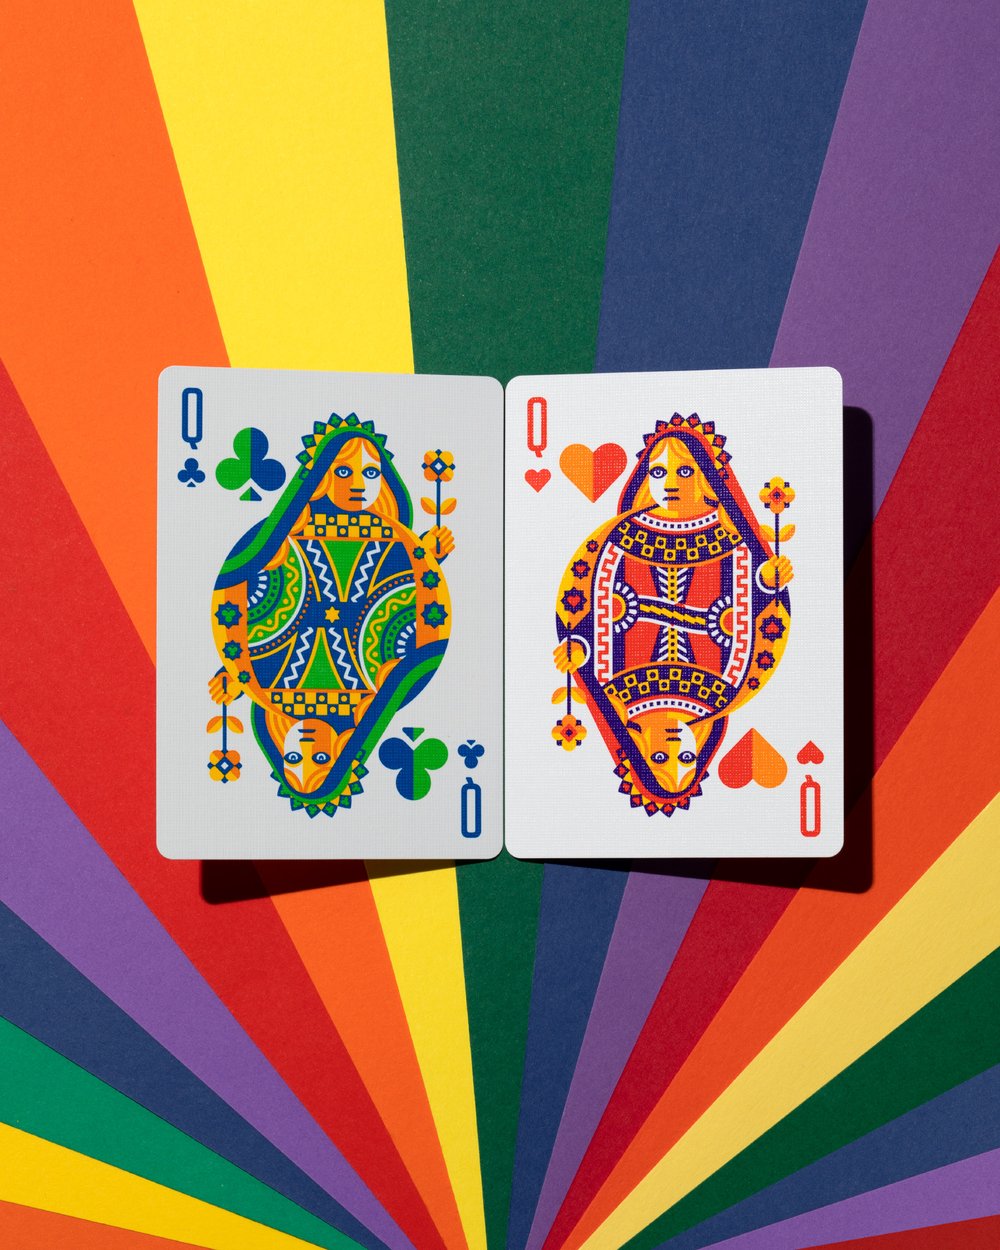 DKNG 'Rainbow Wheel' Playing Cards DKNG